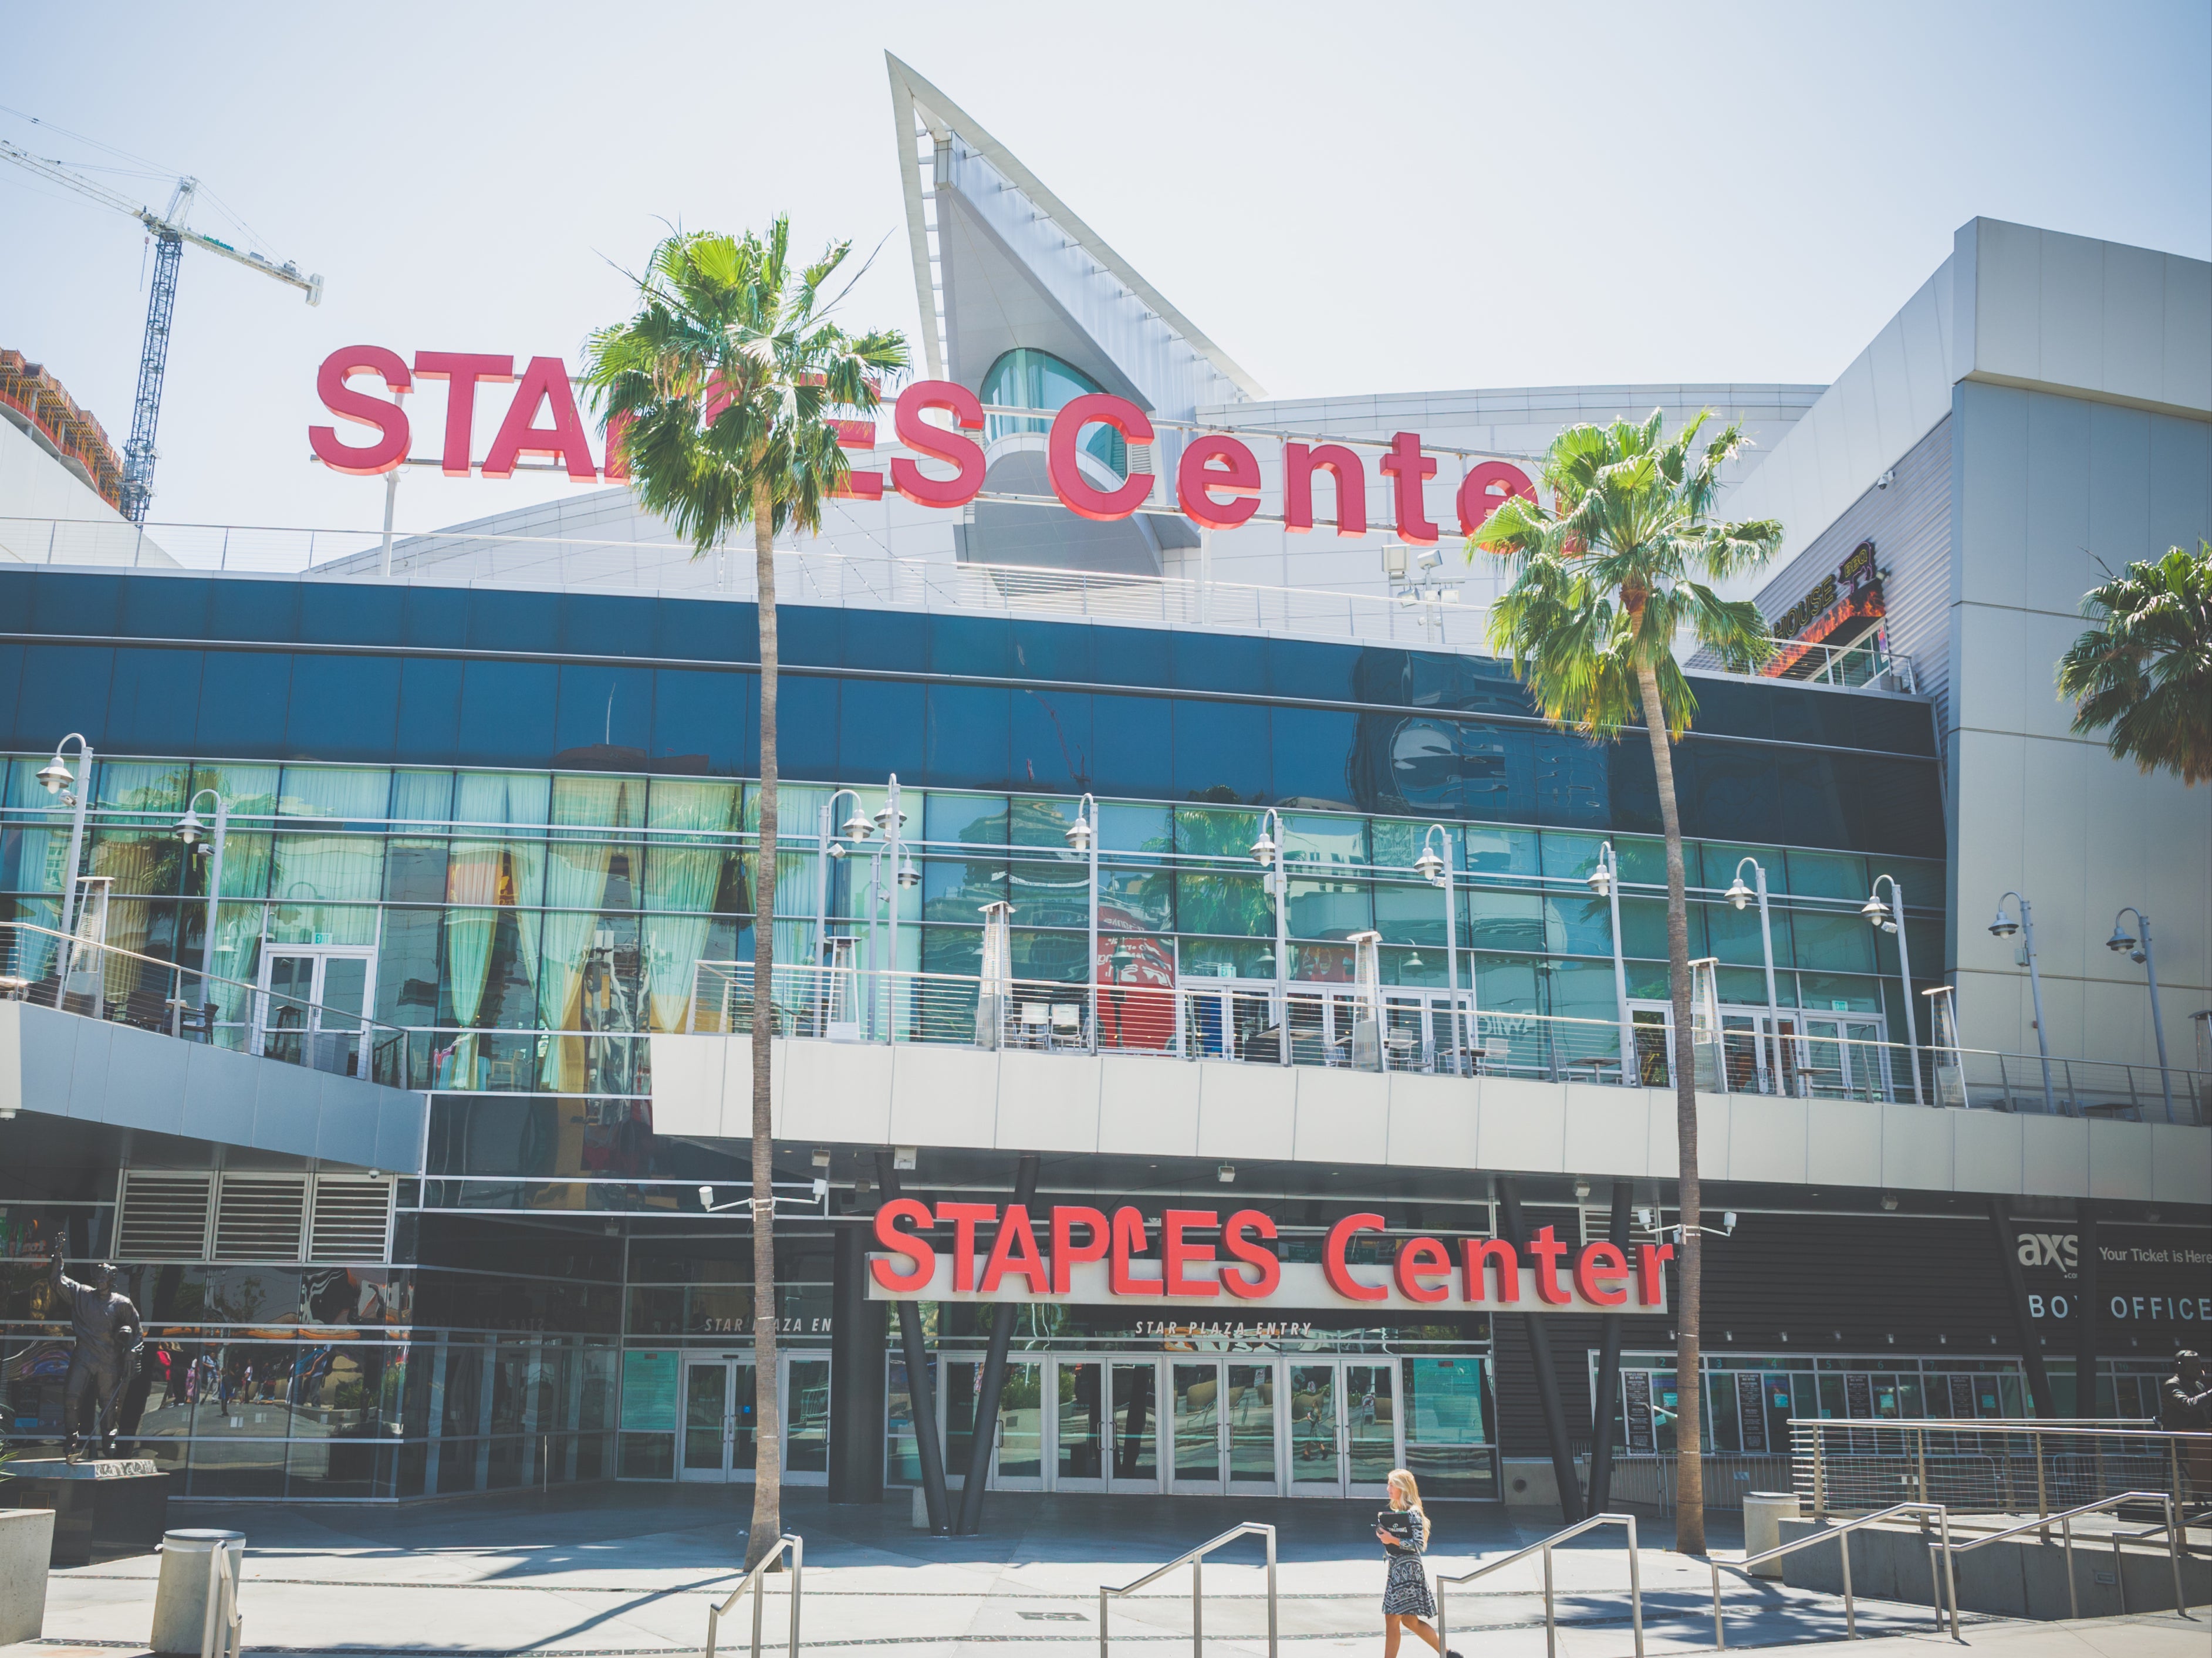 The Staples Centre in downtown Los Angles